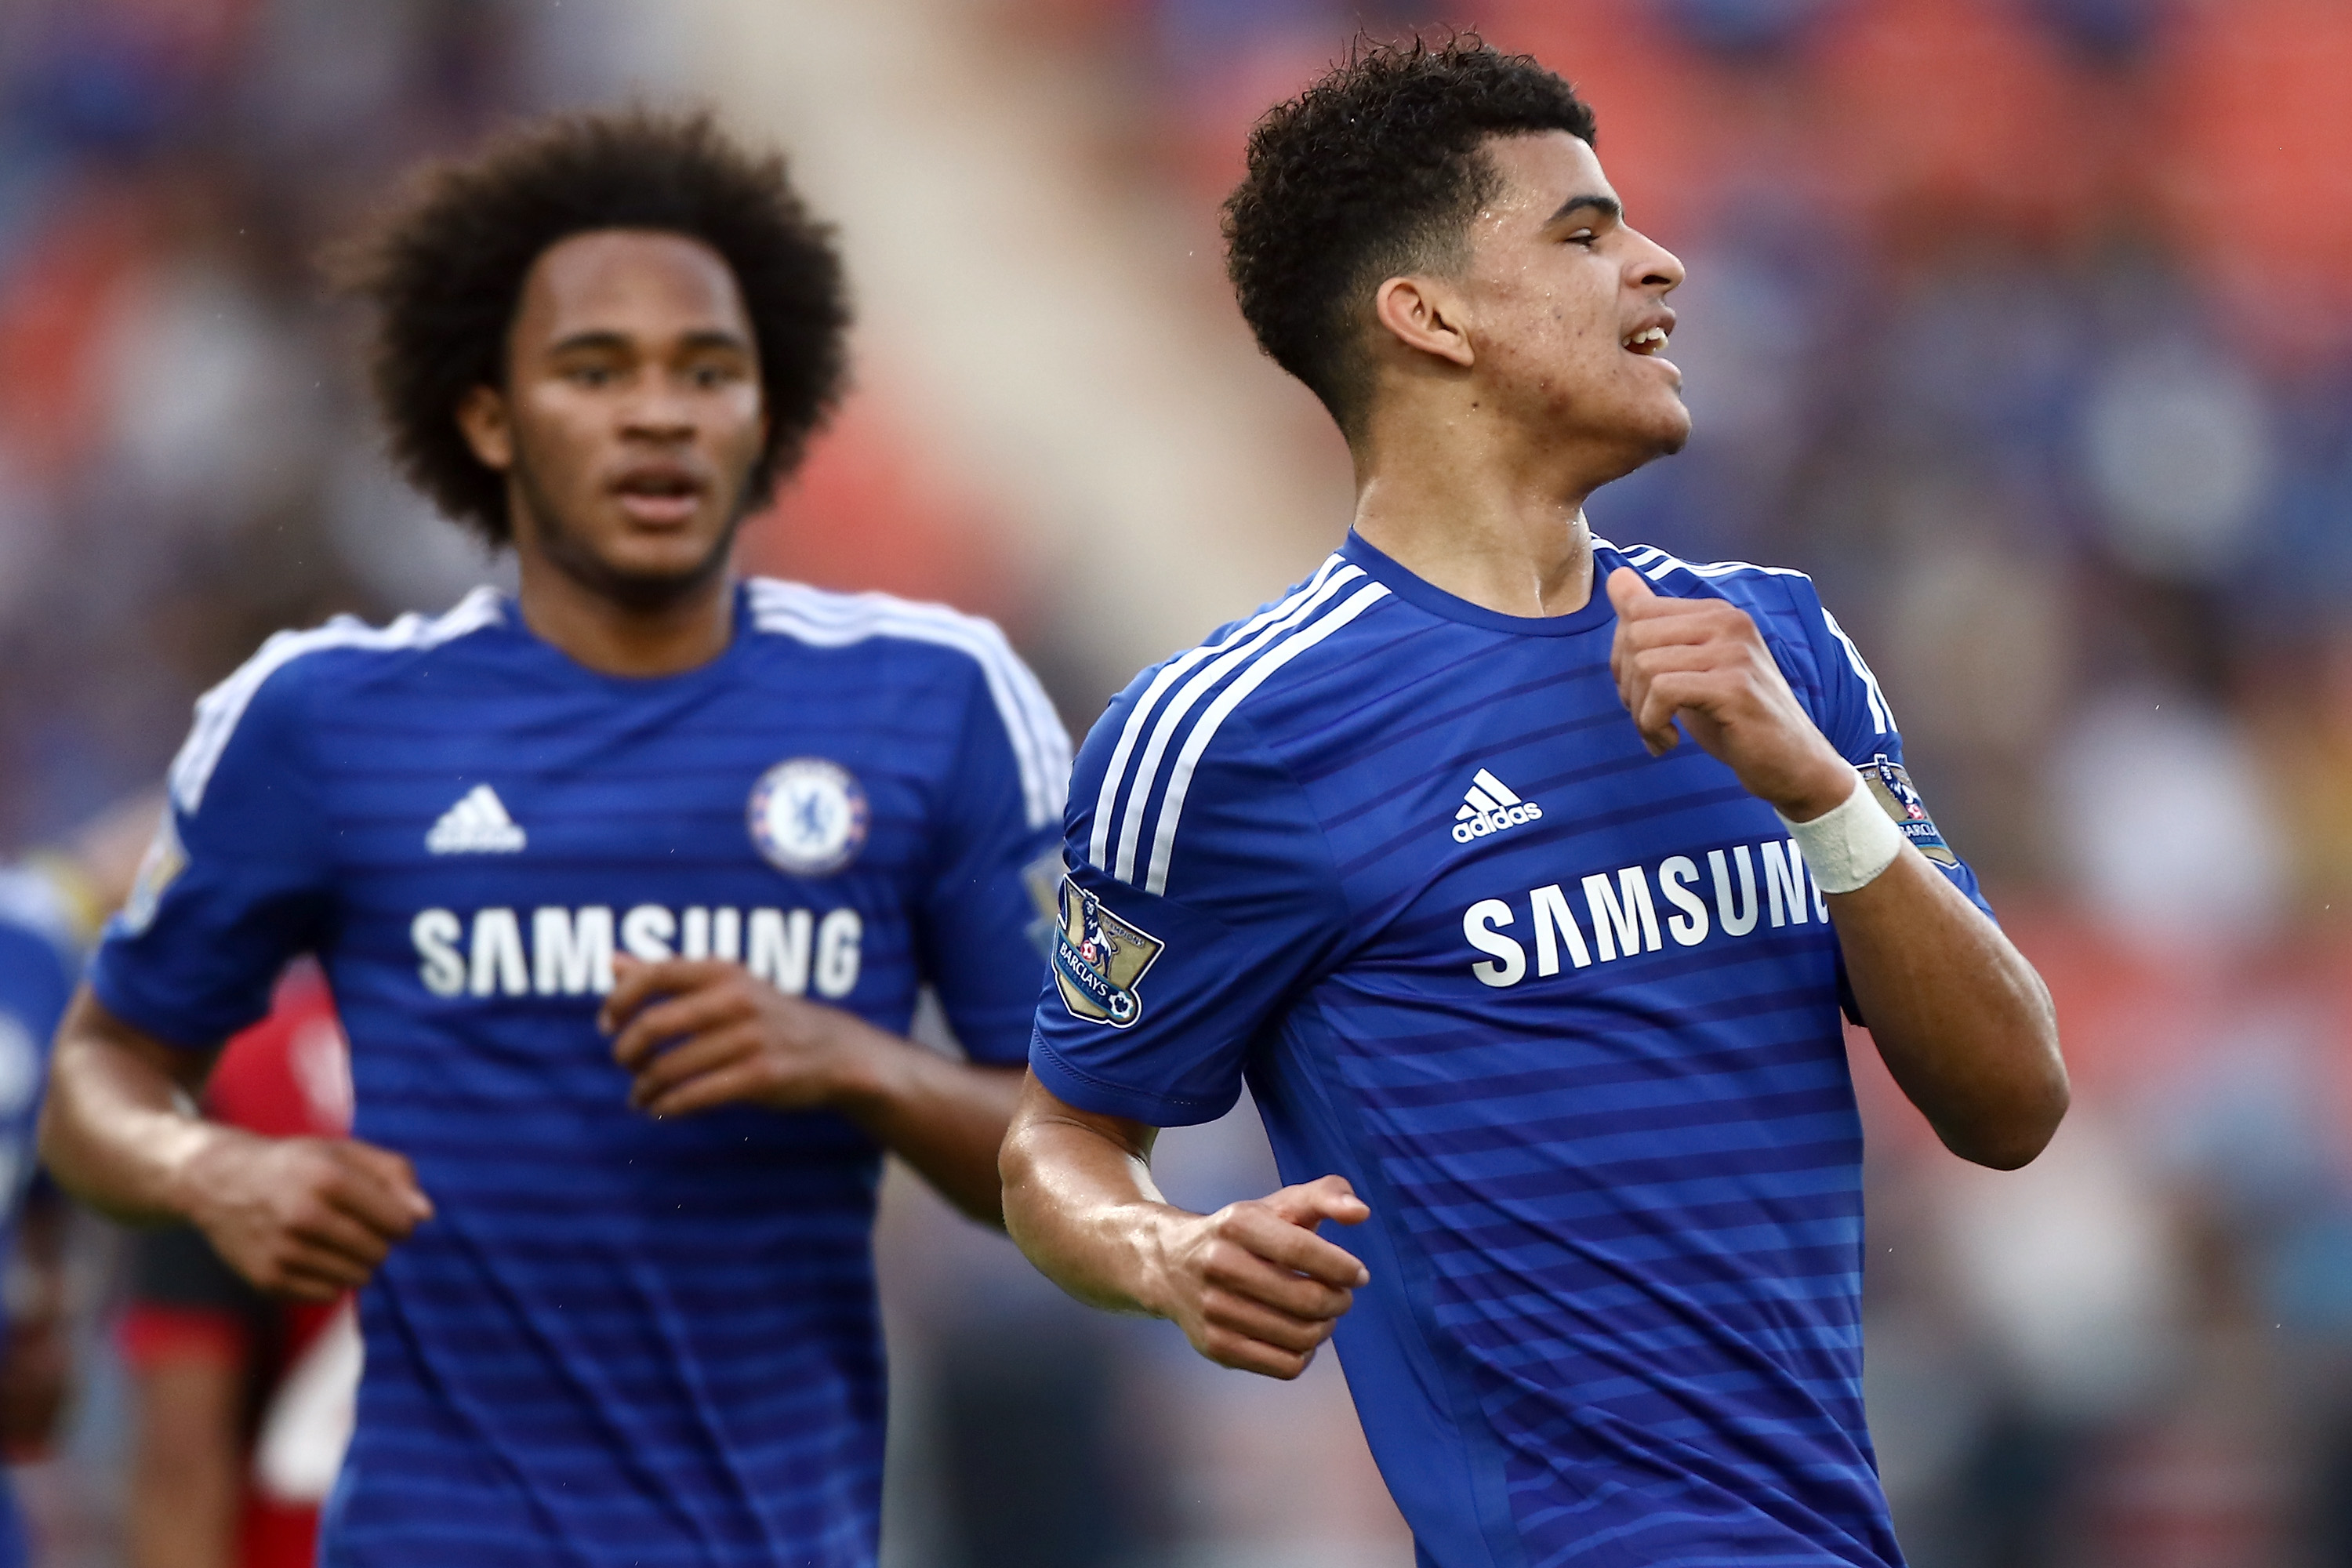 BANGKOK, THAILAND - MAY 30:  Dominic Solanke (R) of Chelsea reacts after scoring against Thailand All-Stars during the international friendly match between Thailand All-Stars and Chelsea FC at Rajamangala Stadium on May 30, 2015 in Bangkok, Thailand.  (Photo by Stanley Chou/Getty Images)